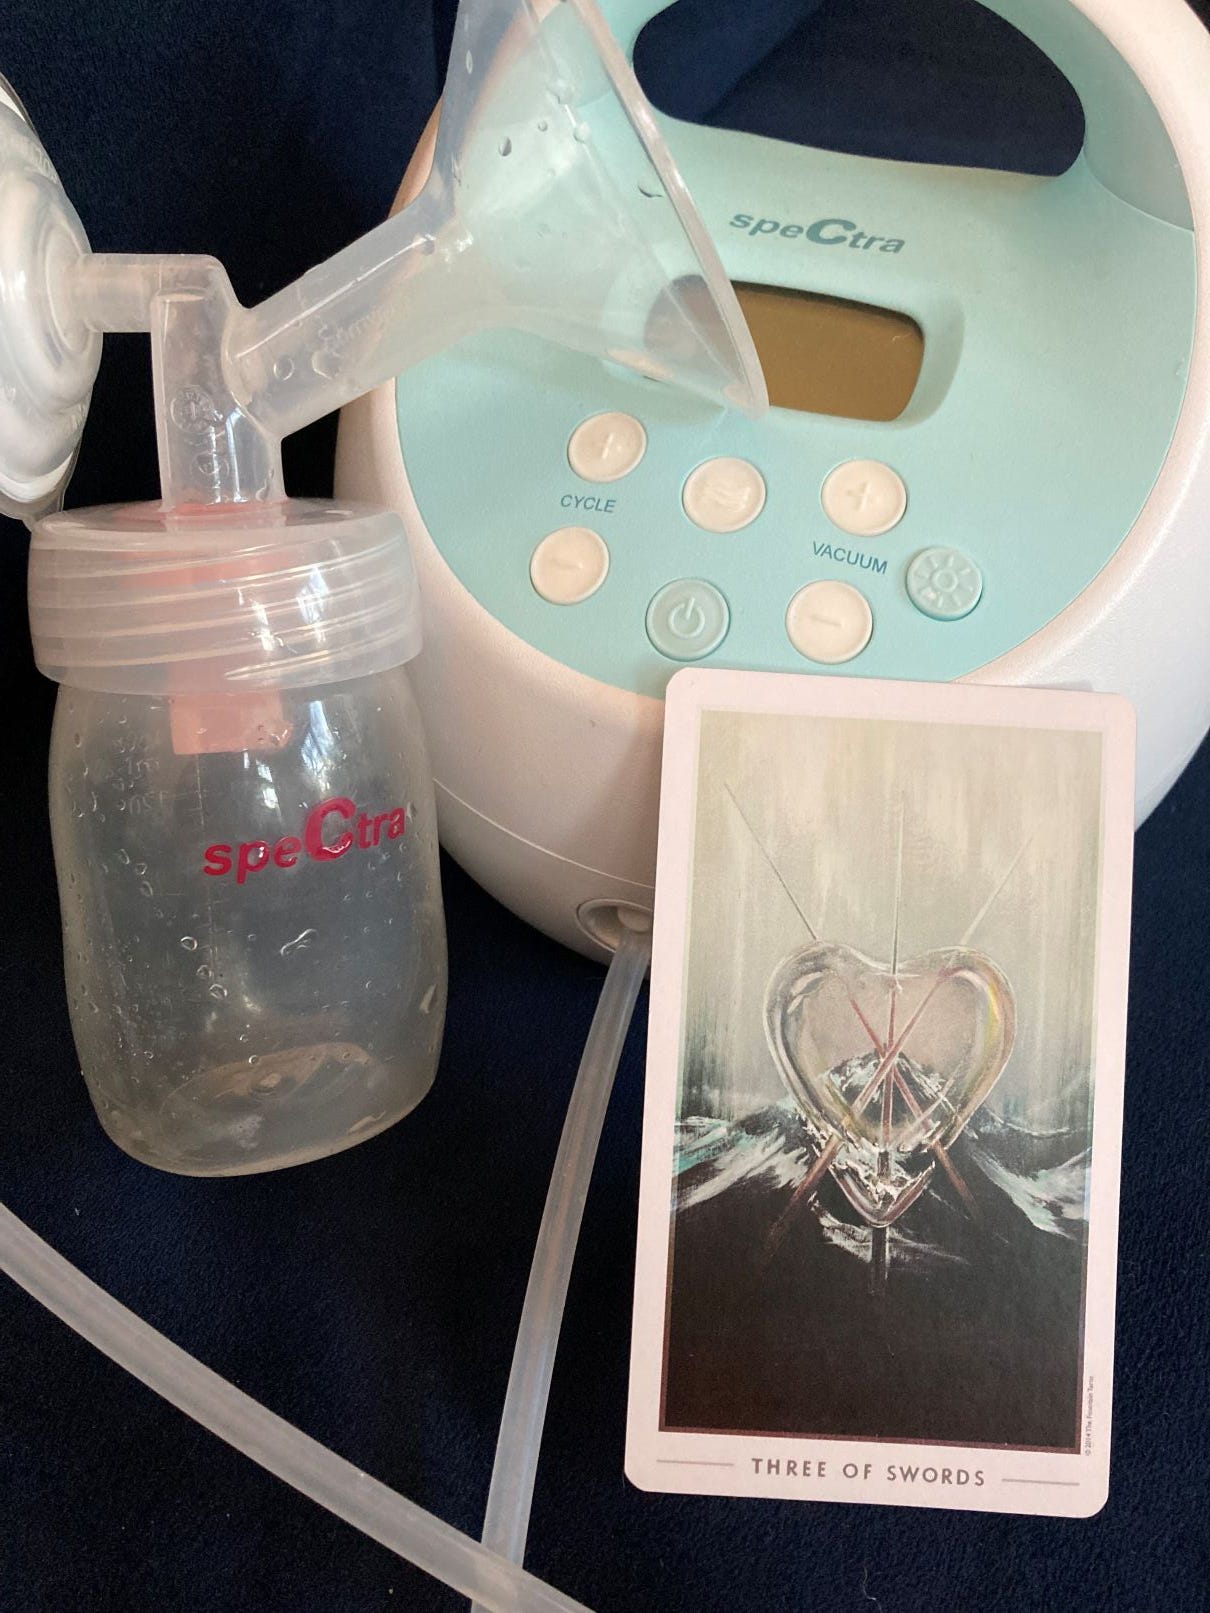 The tarot card Three of Swords sits next to a breast pump against a blue velvet background